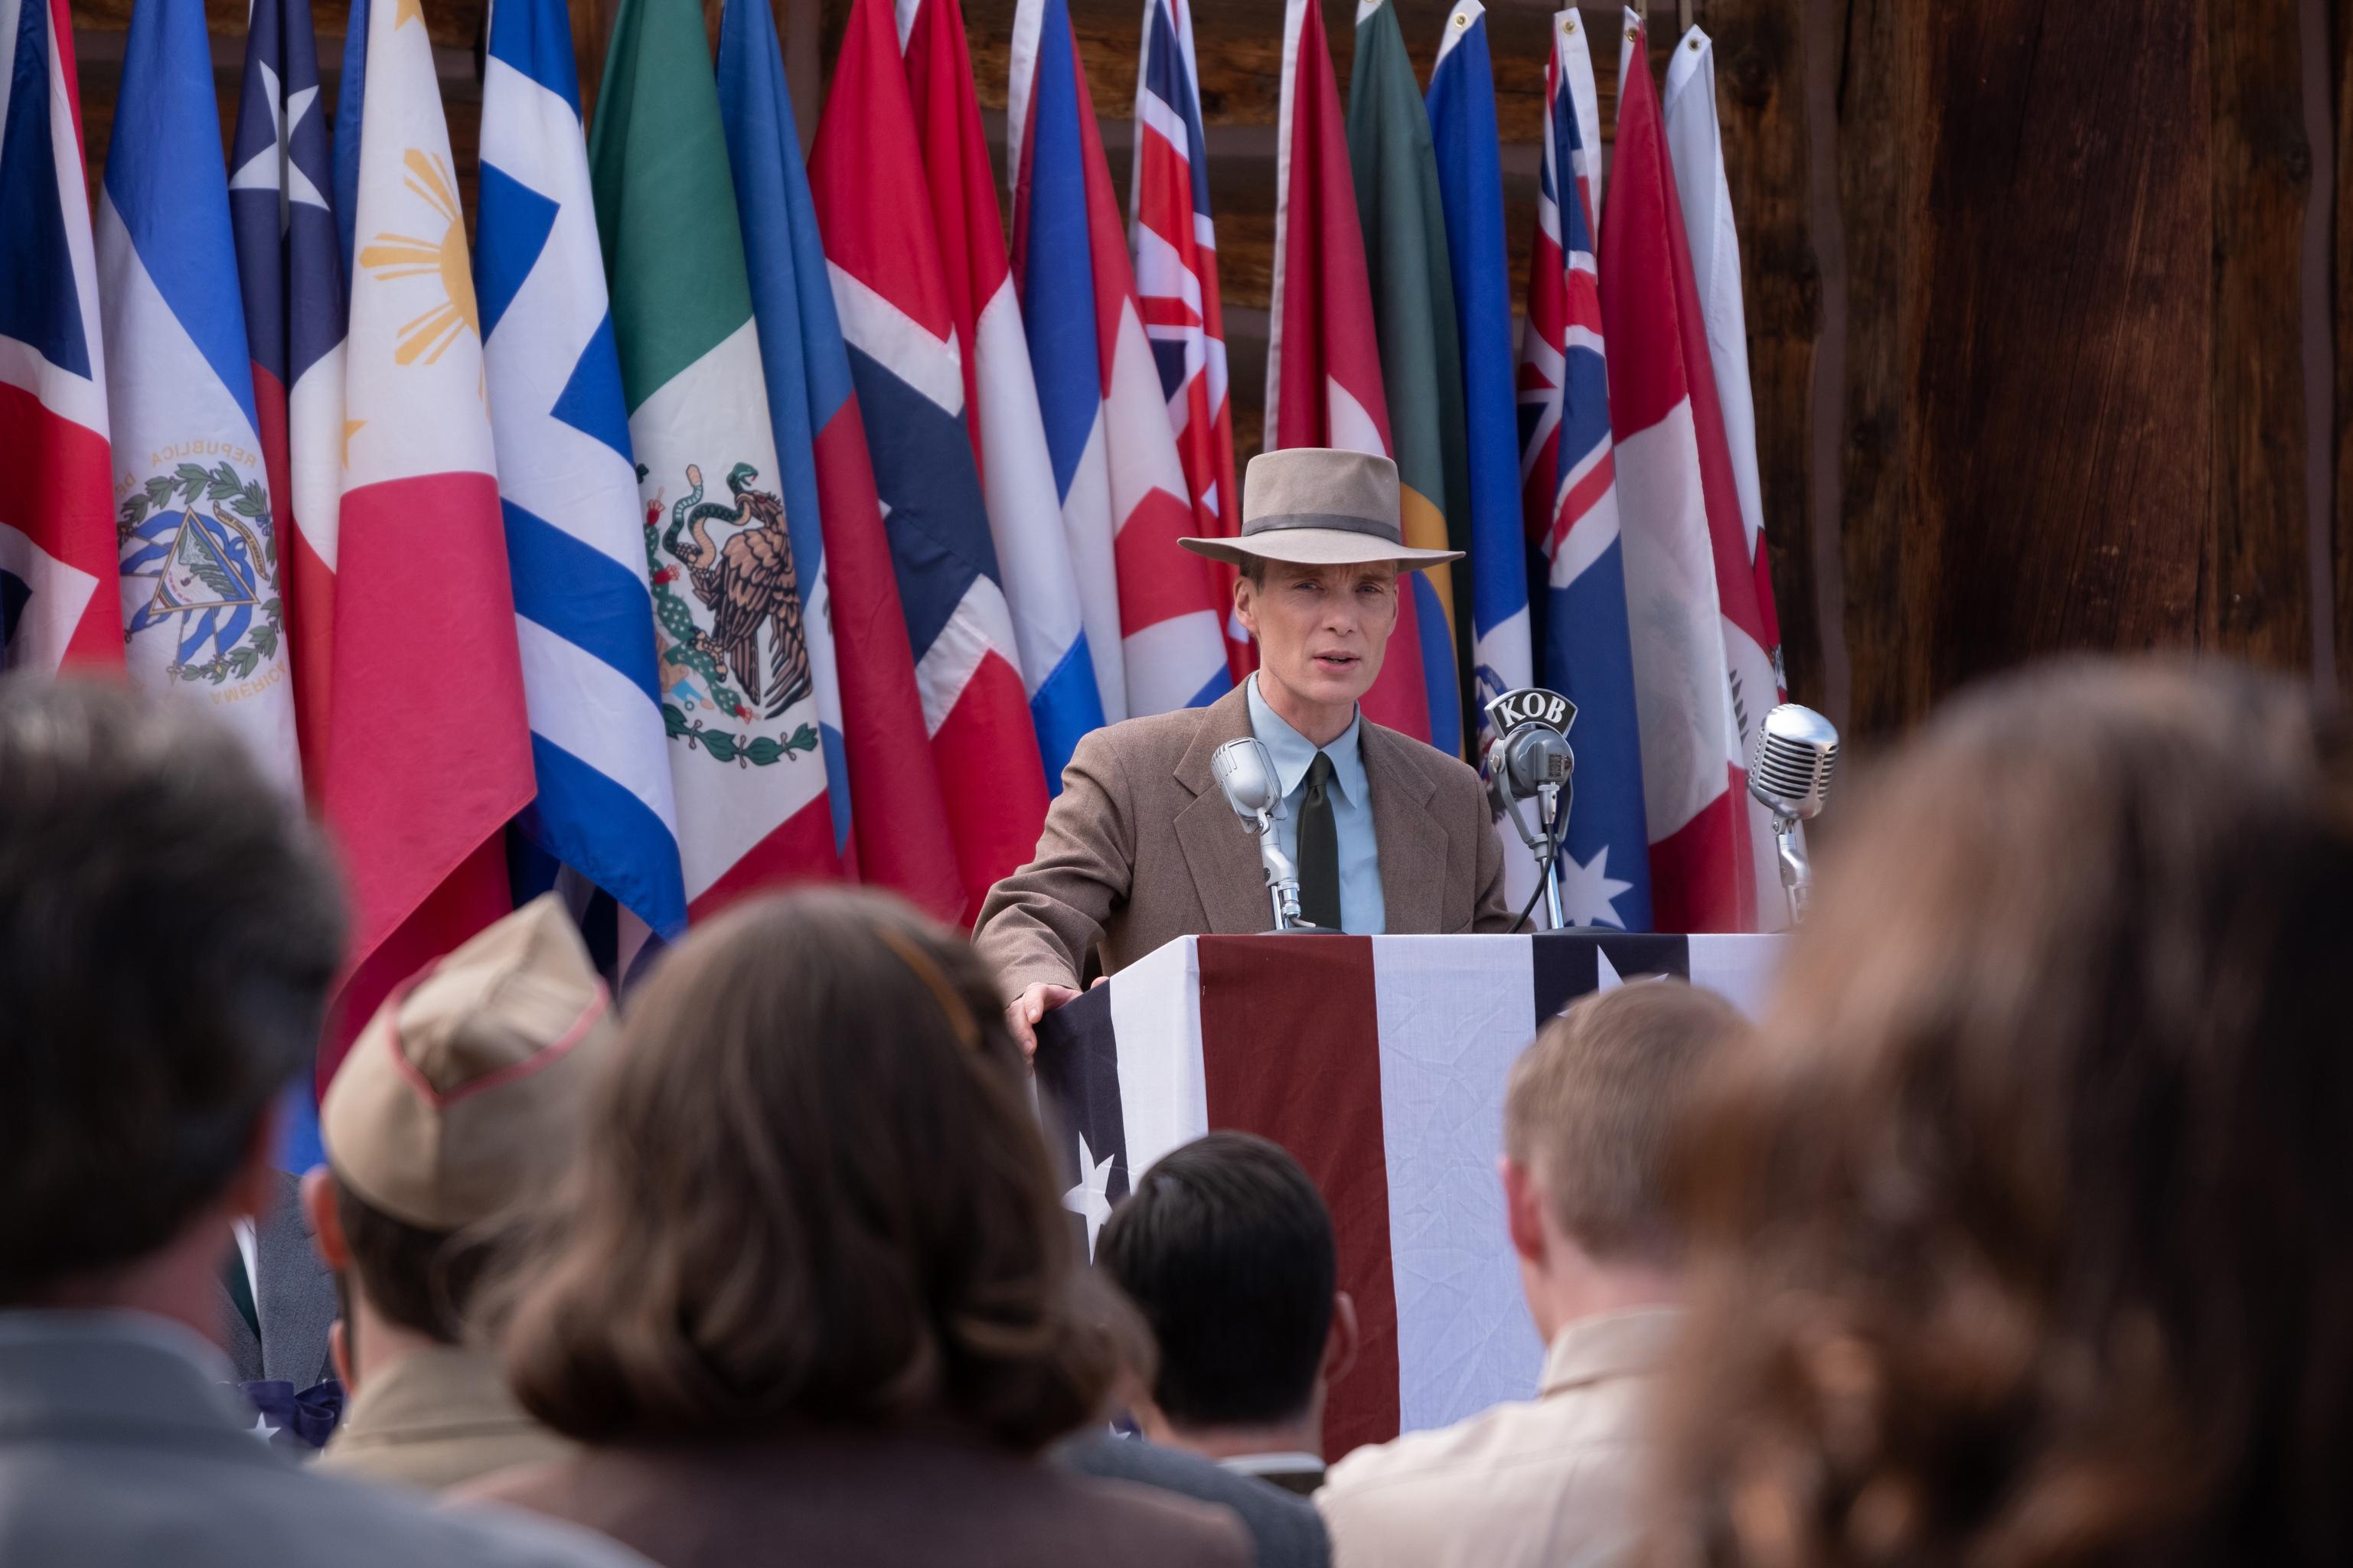 HD Wallpaper of a man resembling Cillian Murphy as Oppenheimer speaking at a podium surrounded by international flags, ideal for desktop background.